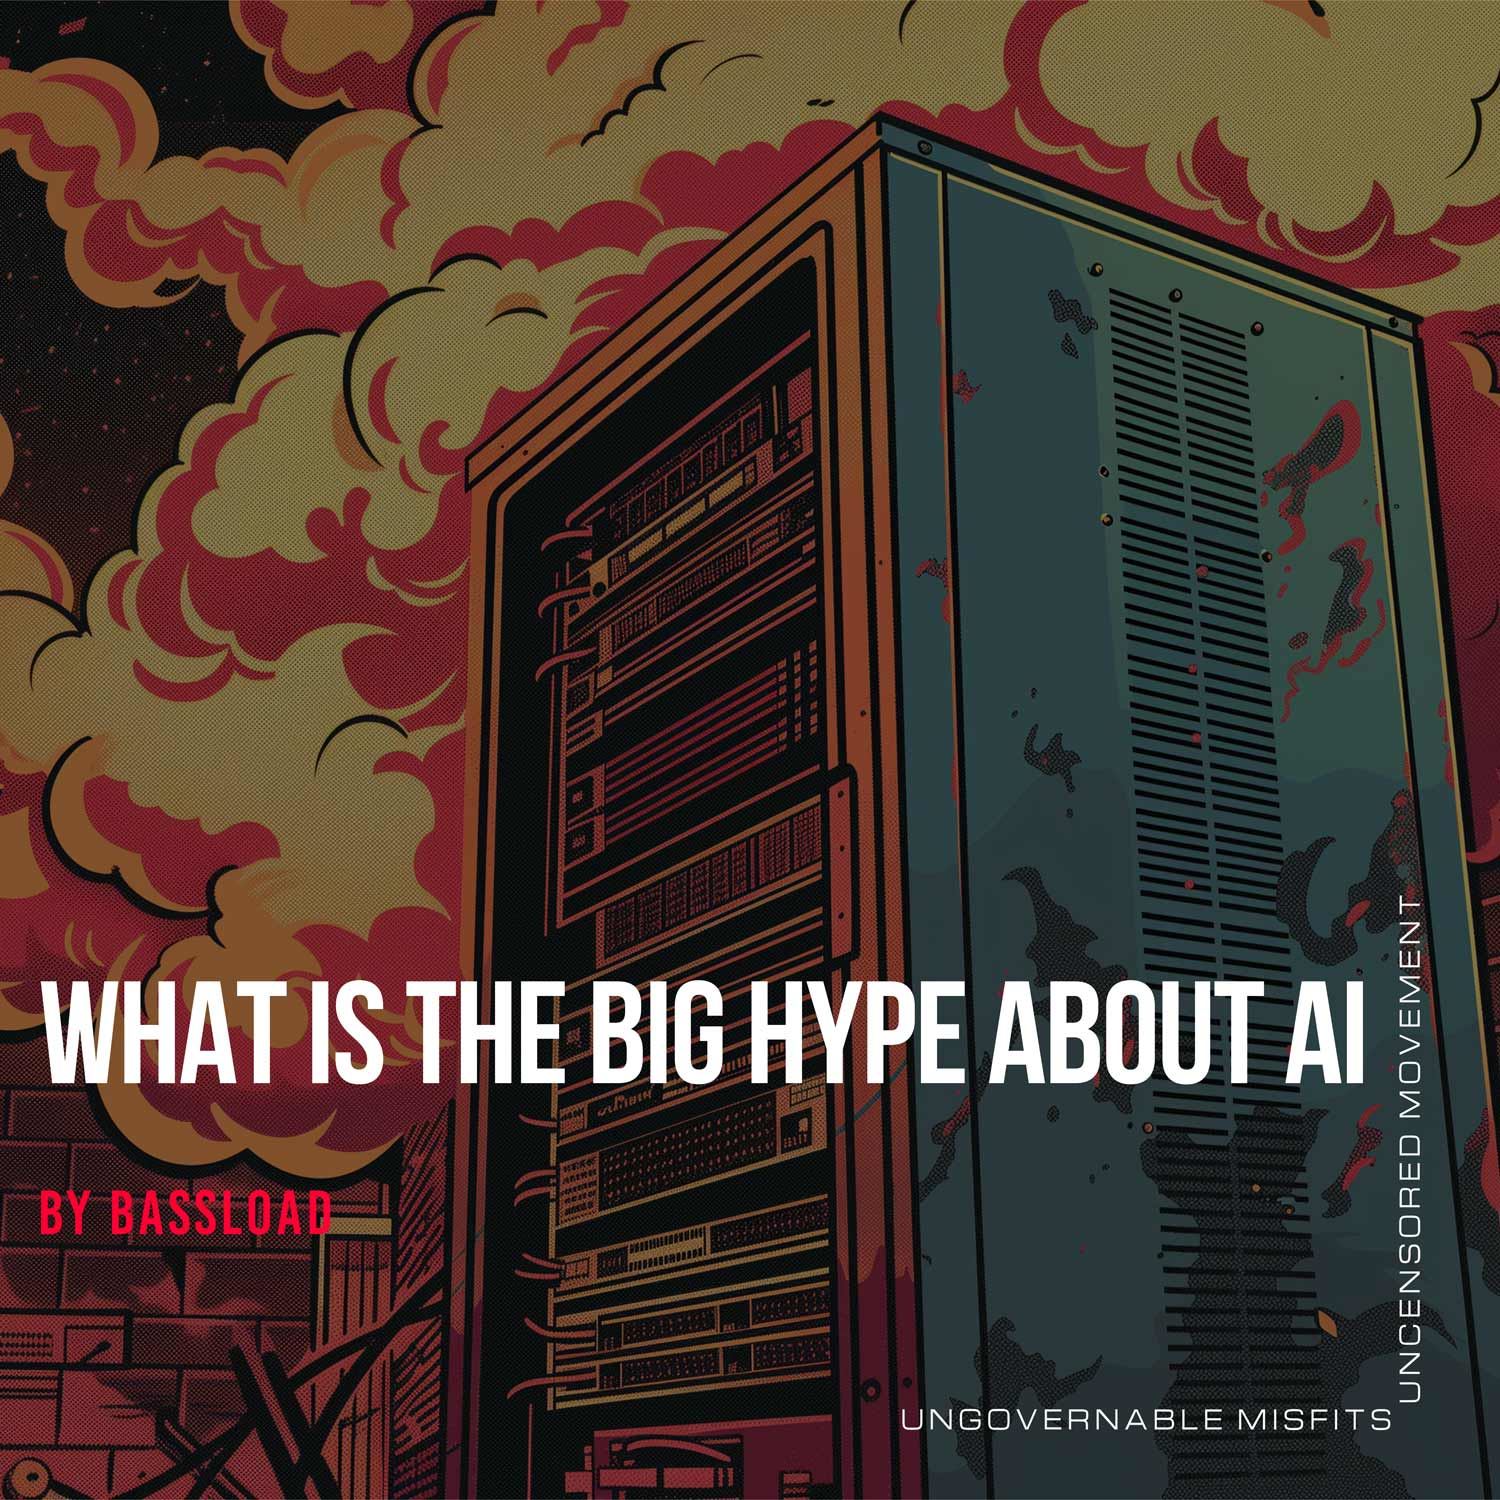 The Big Hype About AI